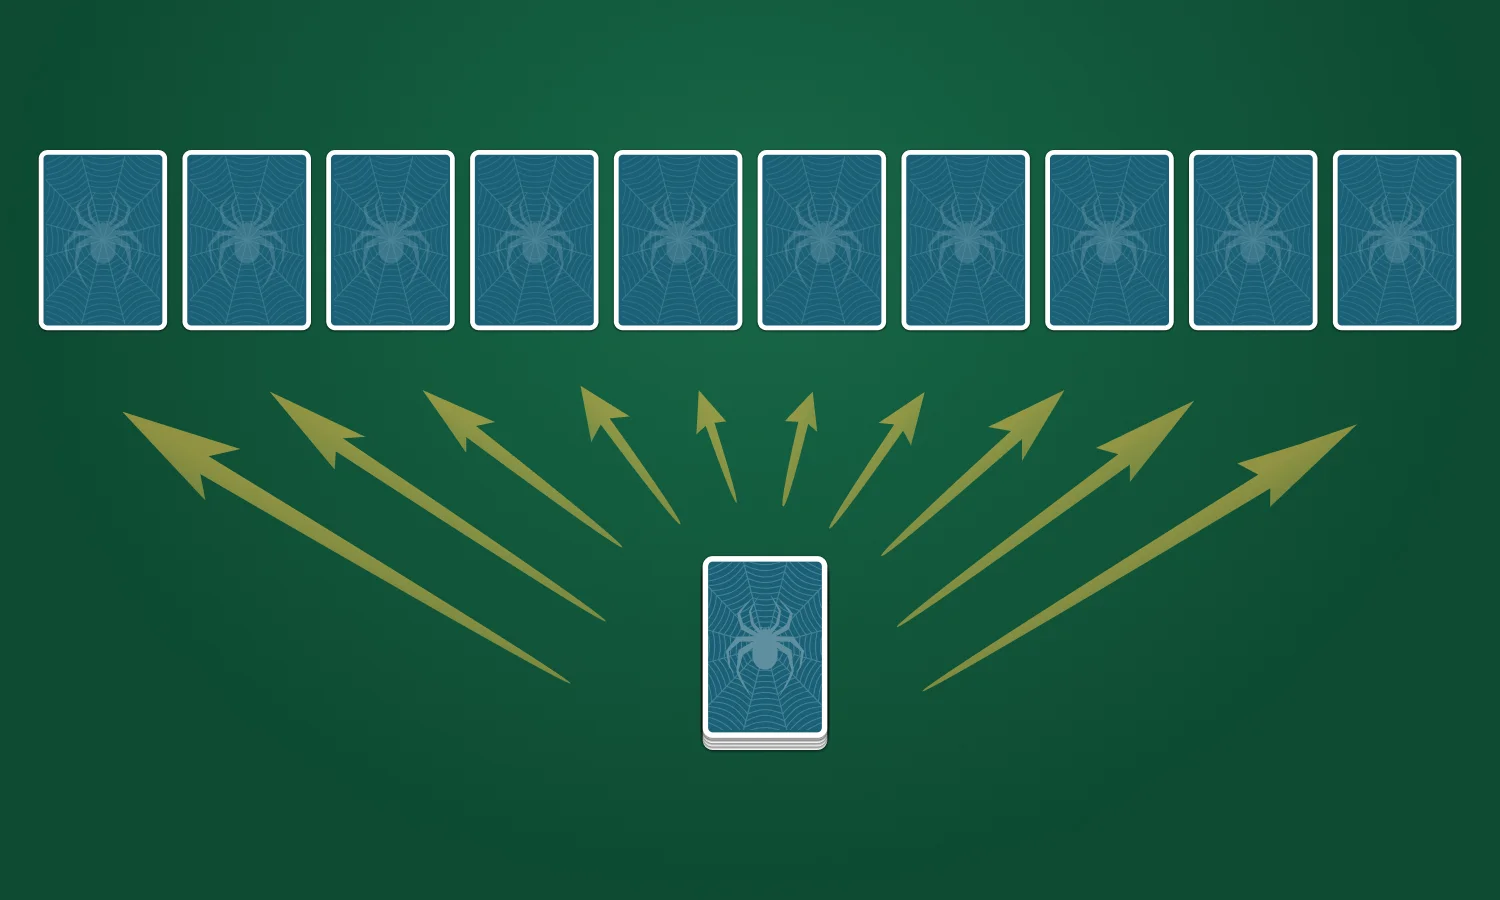 How to Set Up Spider Solitaire: Step 1